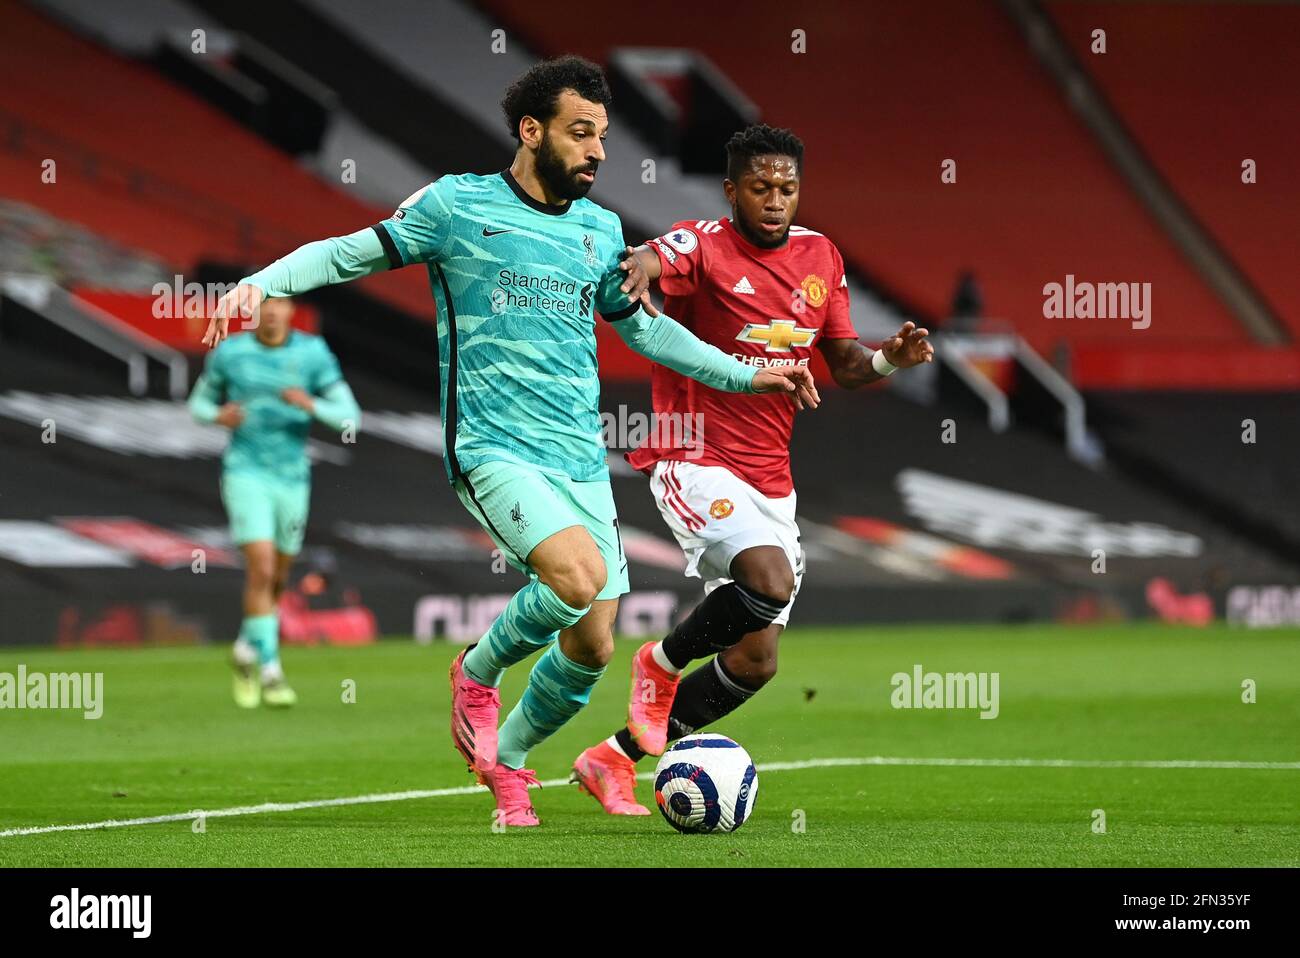 Liverpool's Mohamed Salah (left) and Manchester United's Fred battle for the ball during the Premier League match at Old Trafford, Manchester. Picture date: Thursday May 13, 2021. Stock Photo